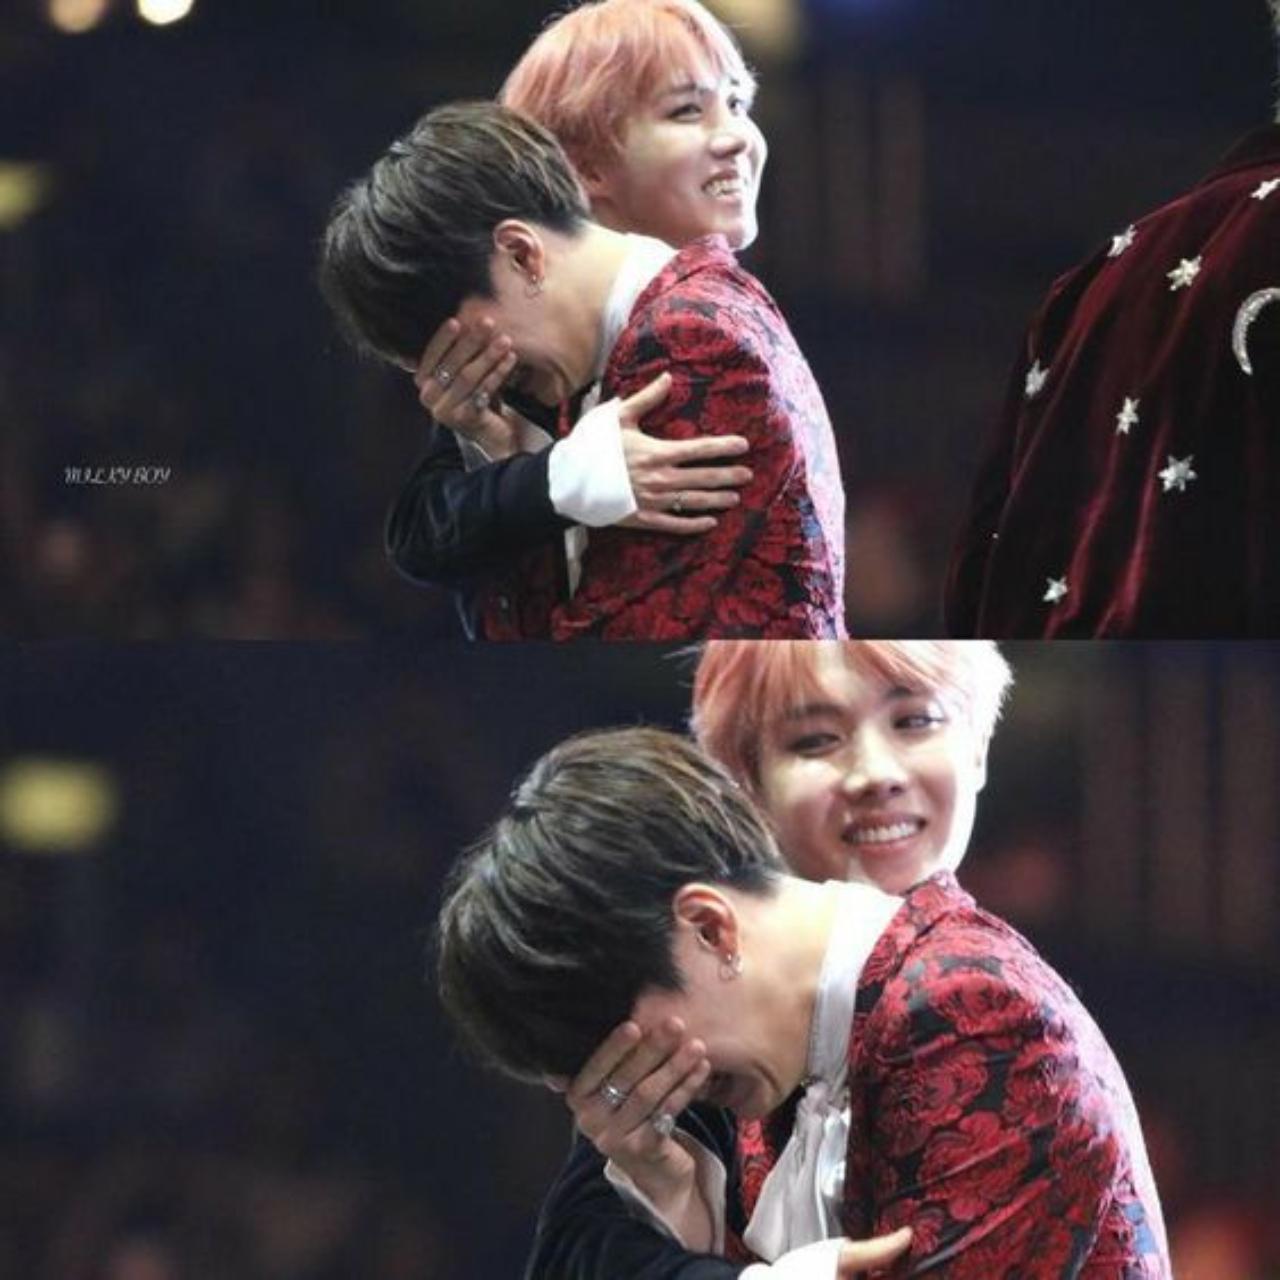 Fellow rapper J-Hope also consoled Suga, who broke down in a rare display of emotion. BTS can always count on each other to have their backs